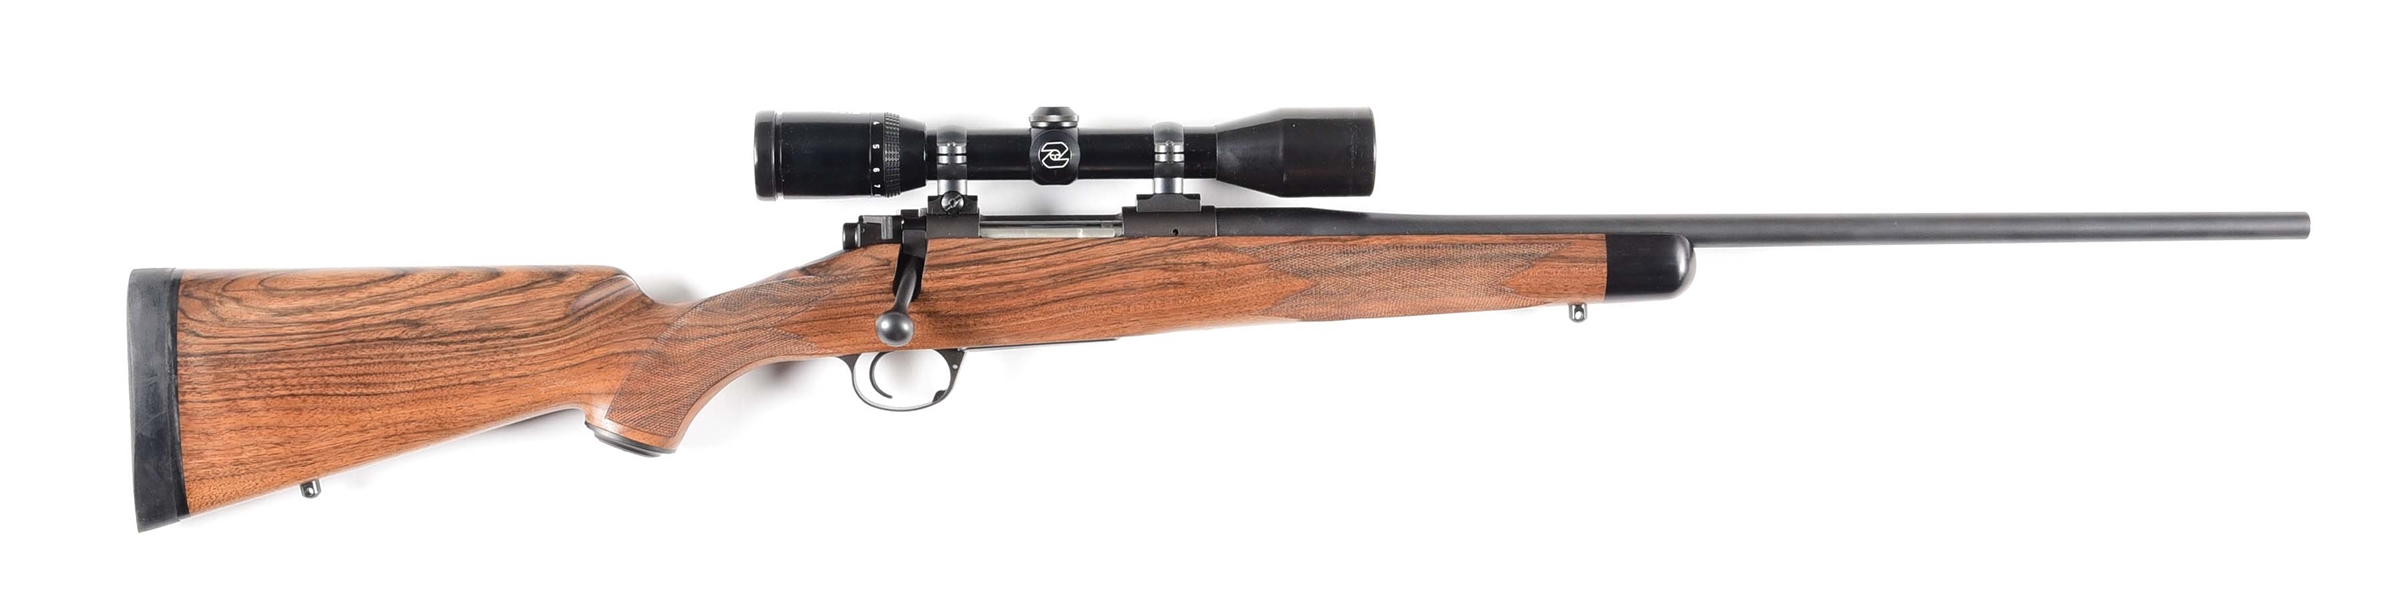 (M) KIMBER 84M SELECT GRADE .308 BOLT ACTION RIFLE WITH SCOPE.